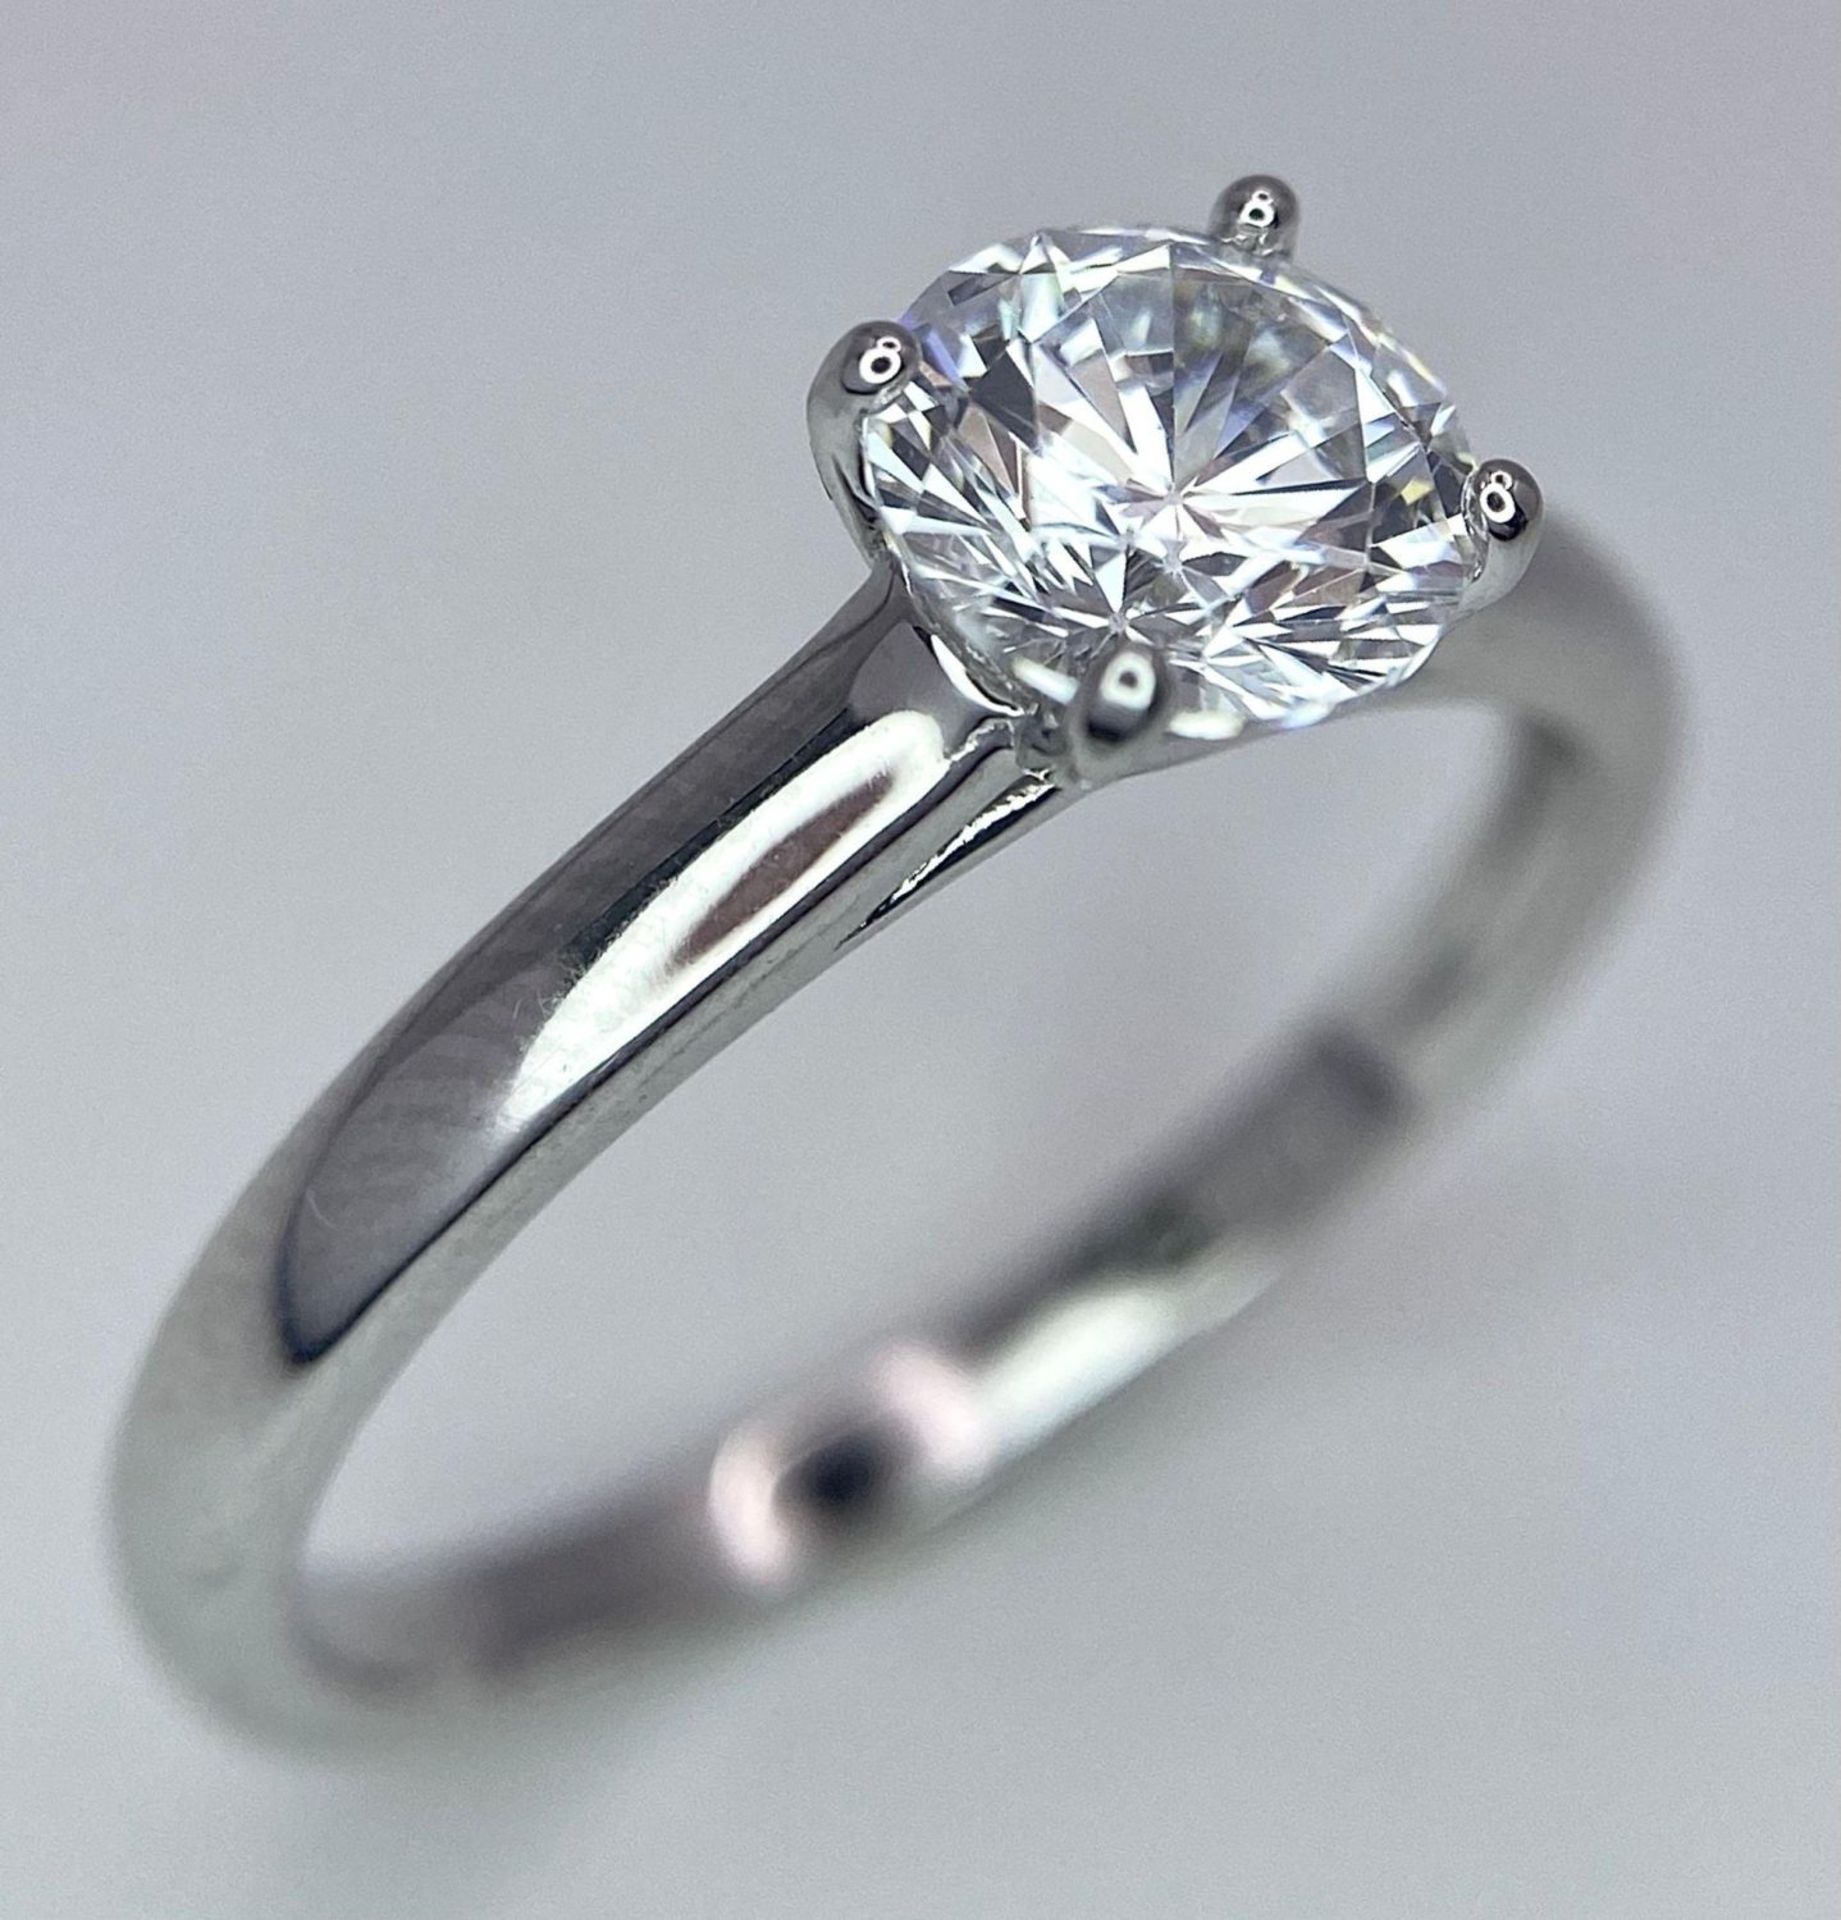 A sterling silver solitaire ring with a round cut cubic zirconium. Size: N, weight: 2 g. - Bild 3 aus 16